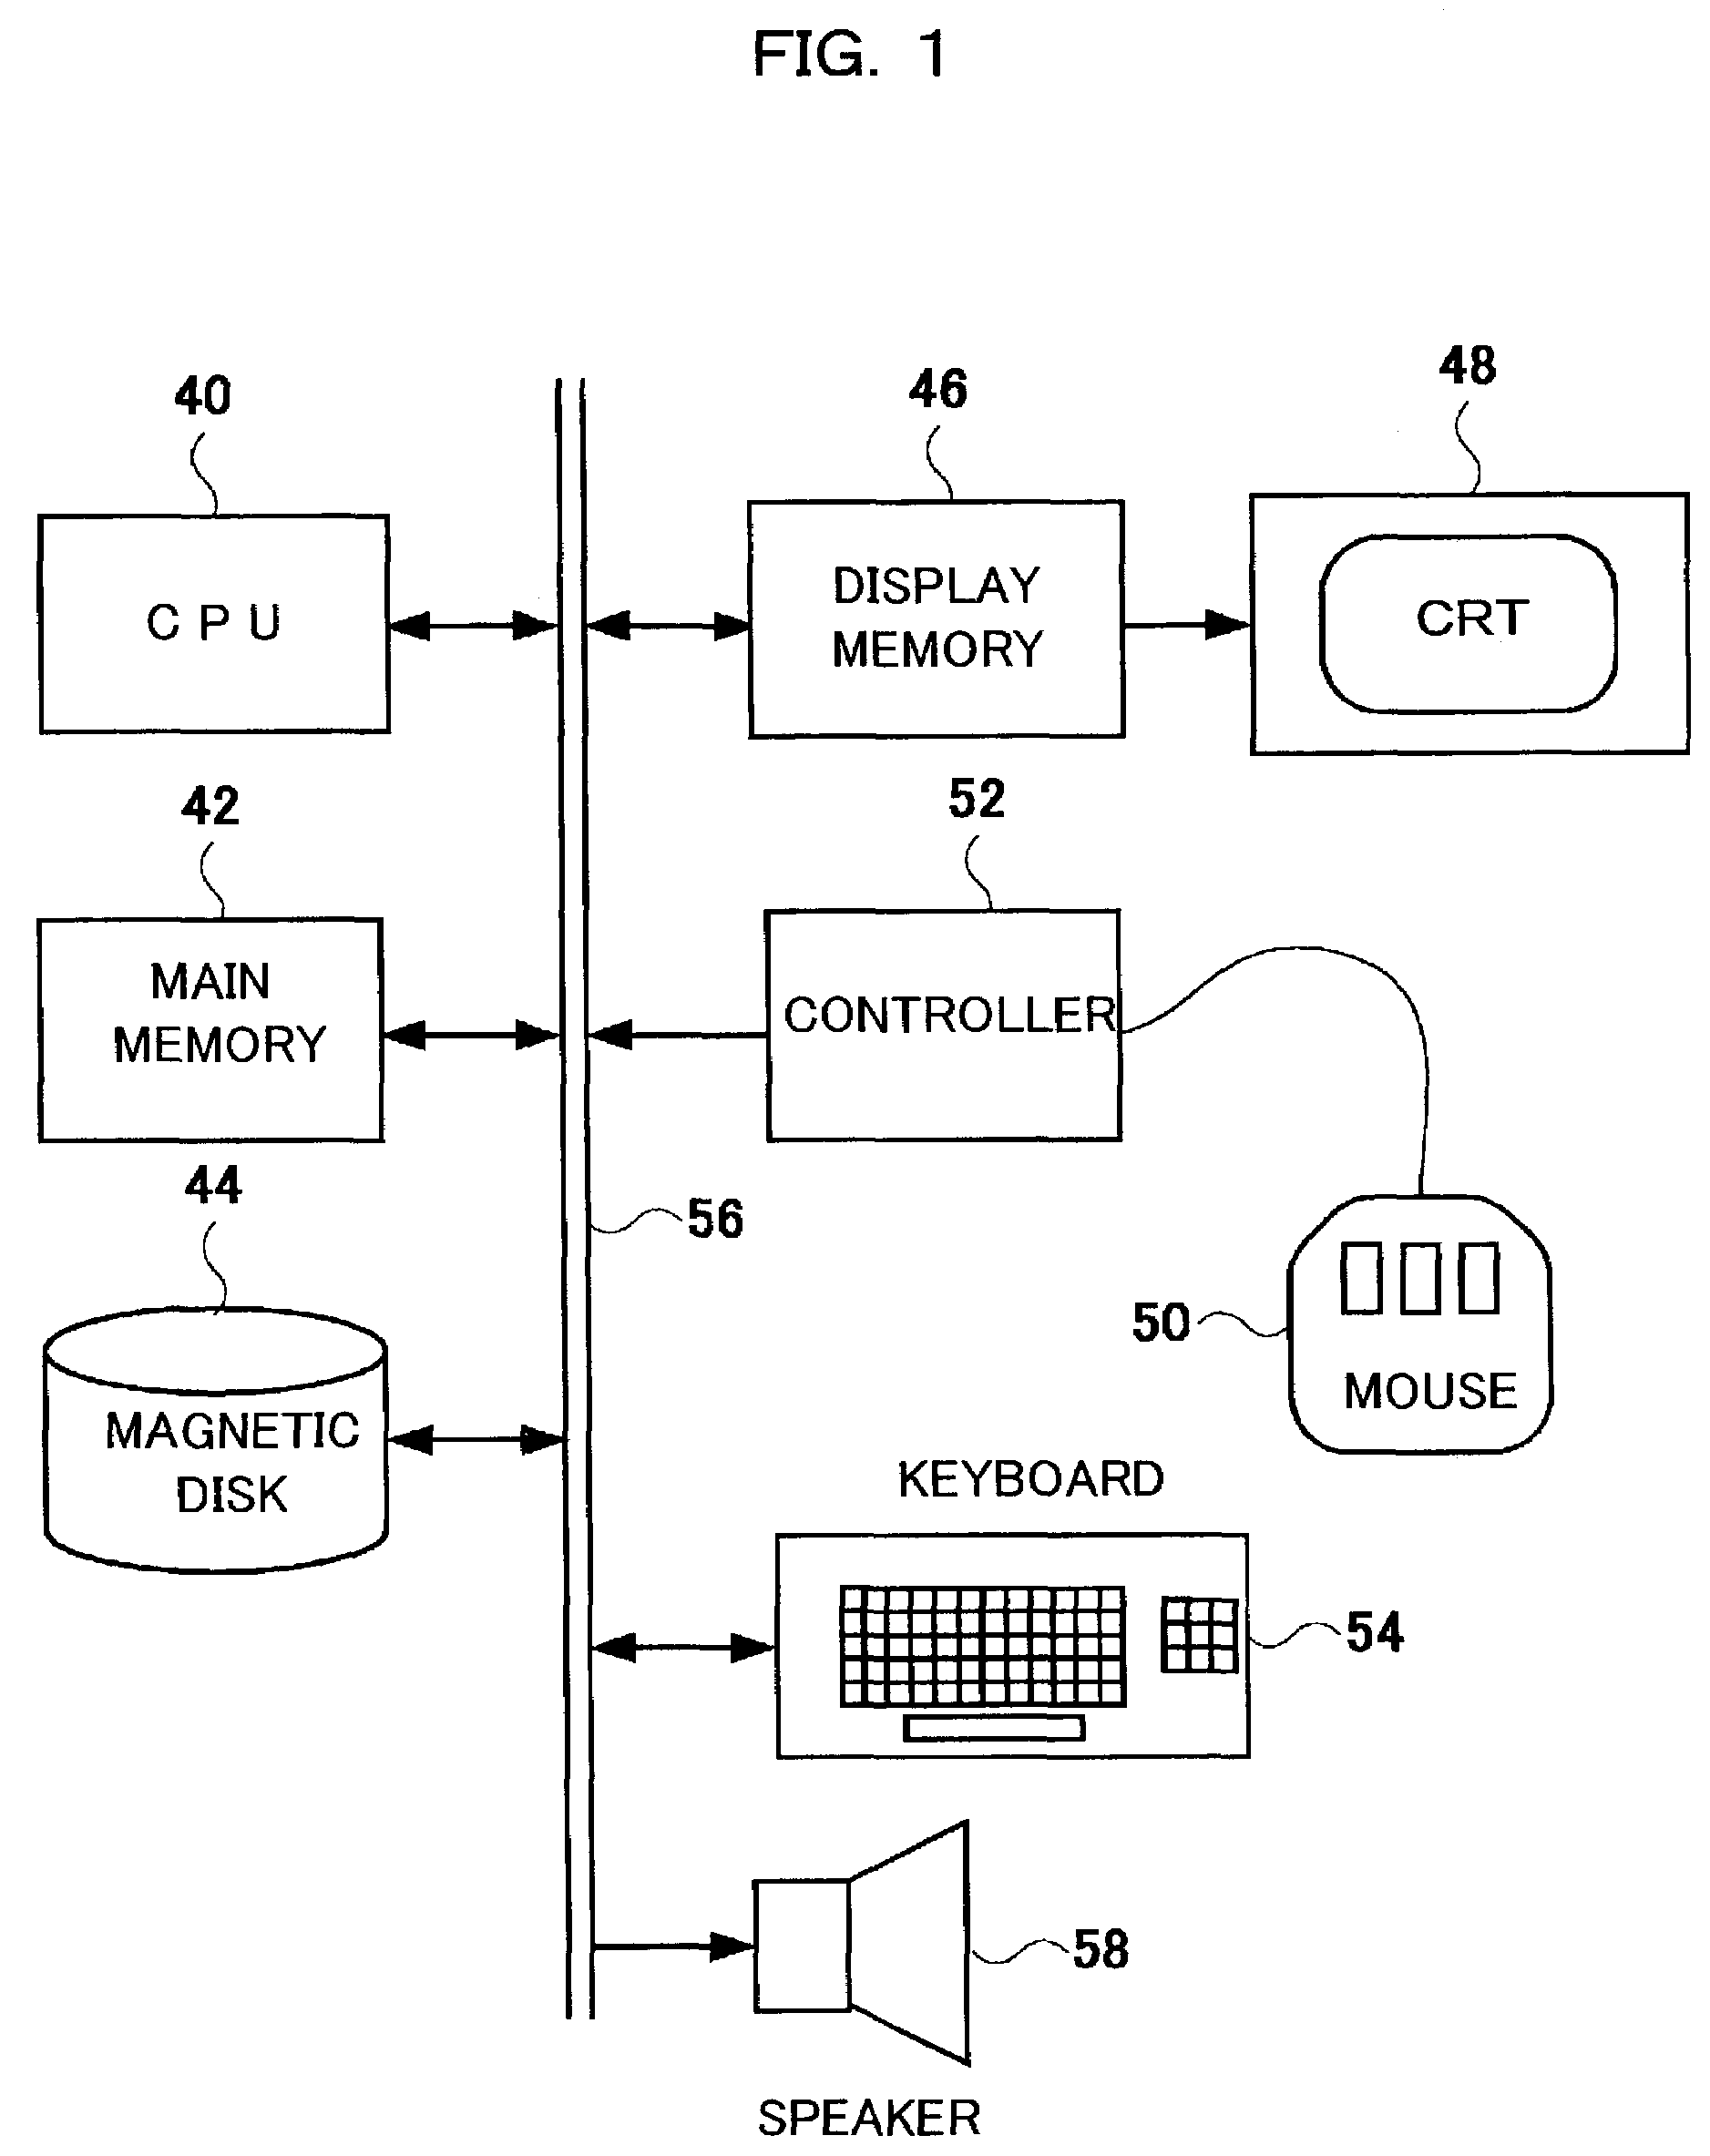 Image diagnosis supporting device